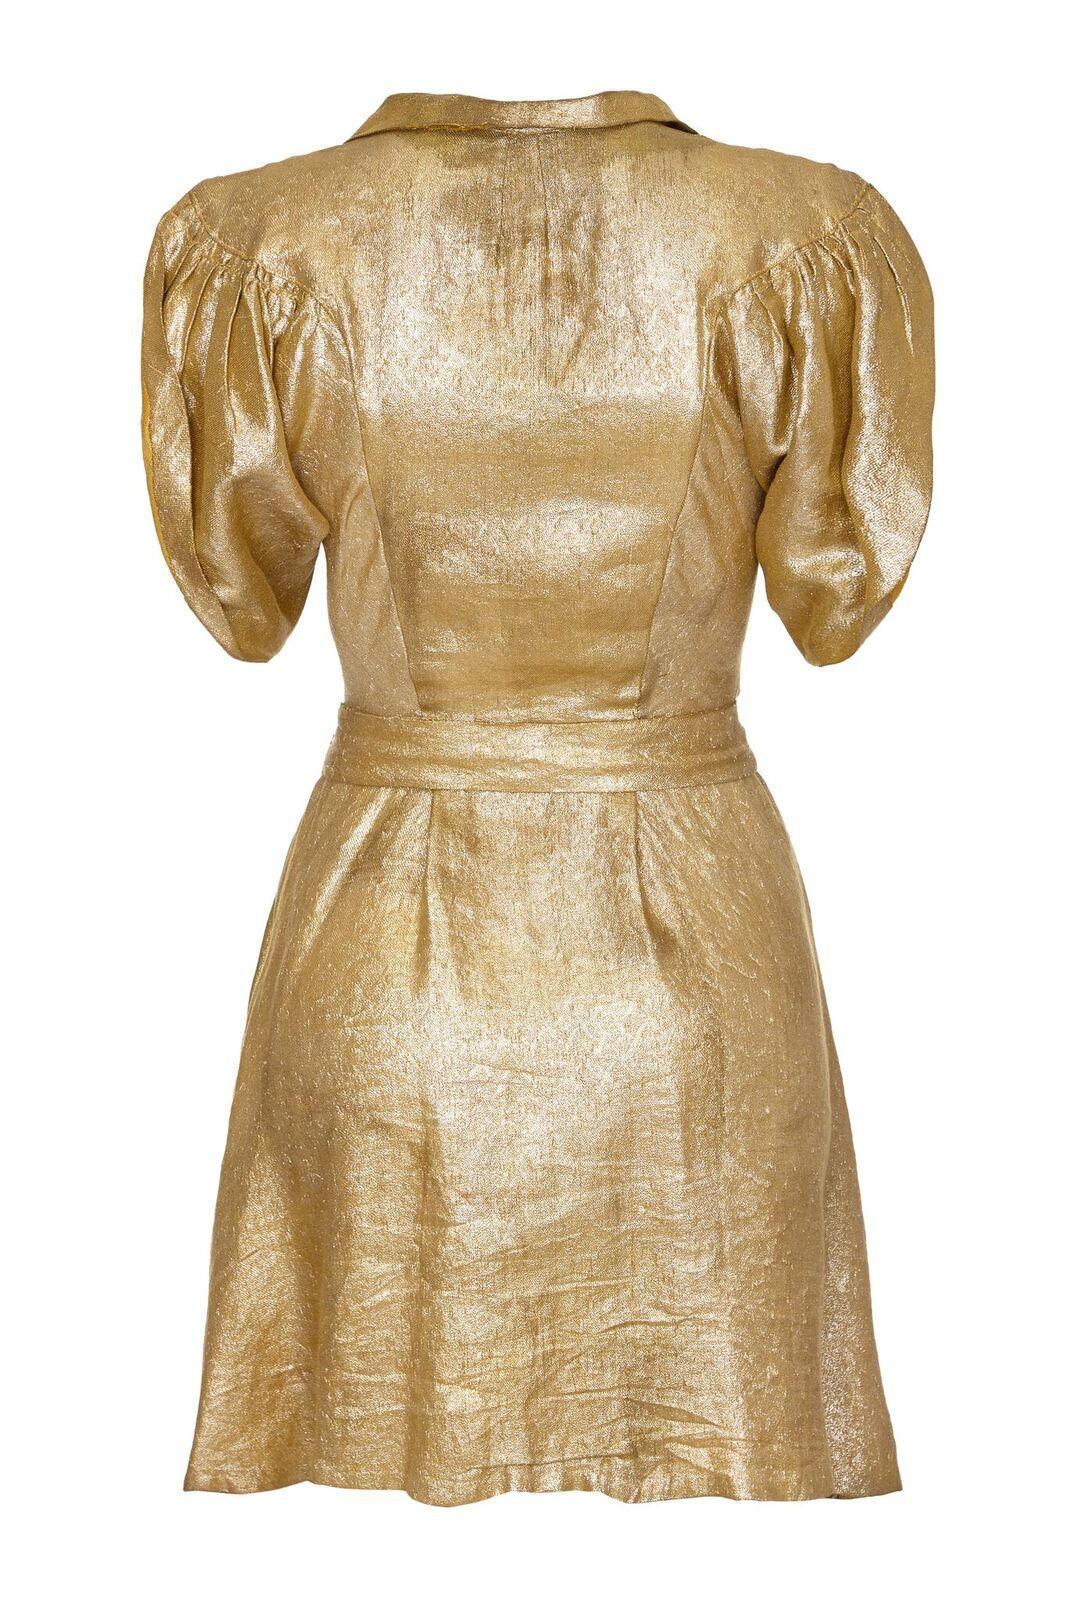 This incredible gold lame party dress circa late 1930s is in wonderful vintage condition and is undeniably modern for a piece of this era. The soft gold metallic fabric is beautifully tailored in the bodice with batwing style sleeves curving in